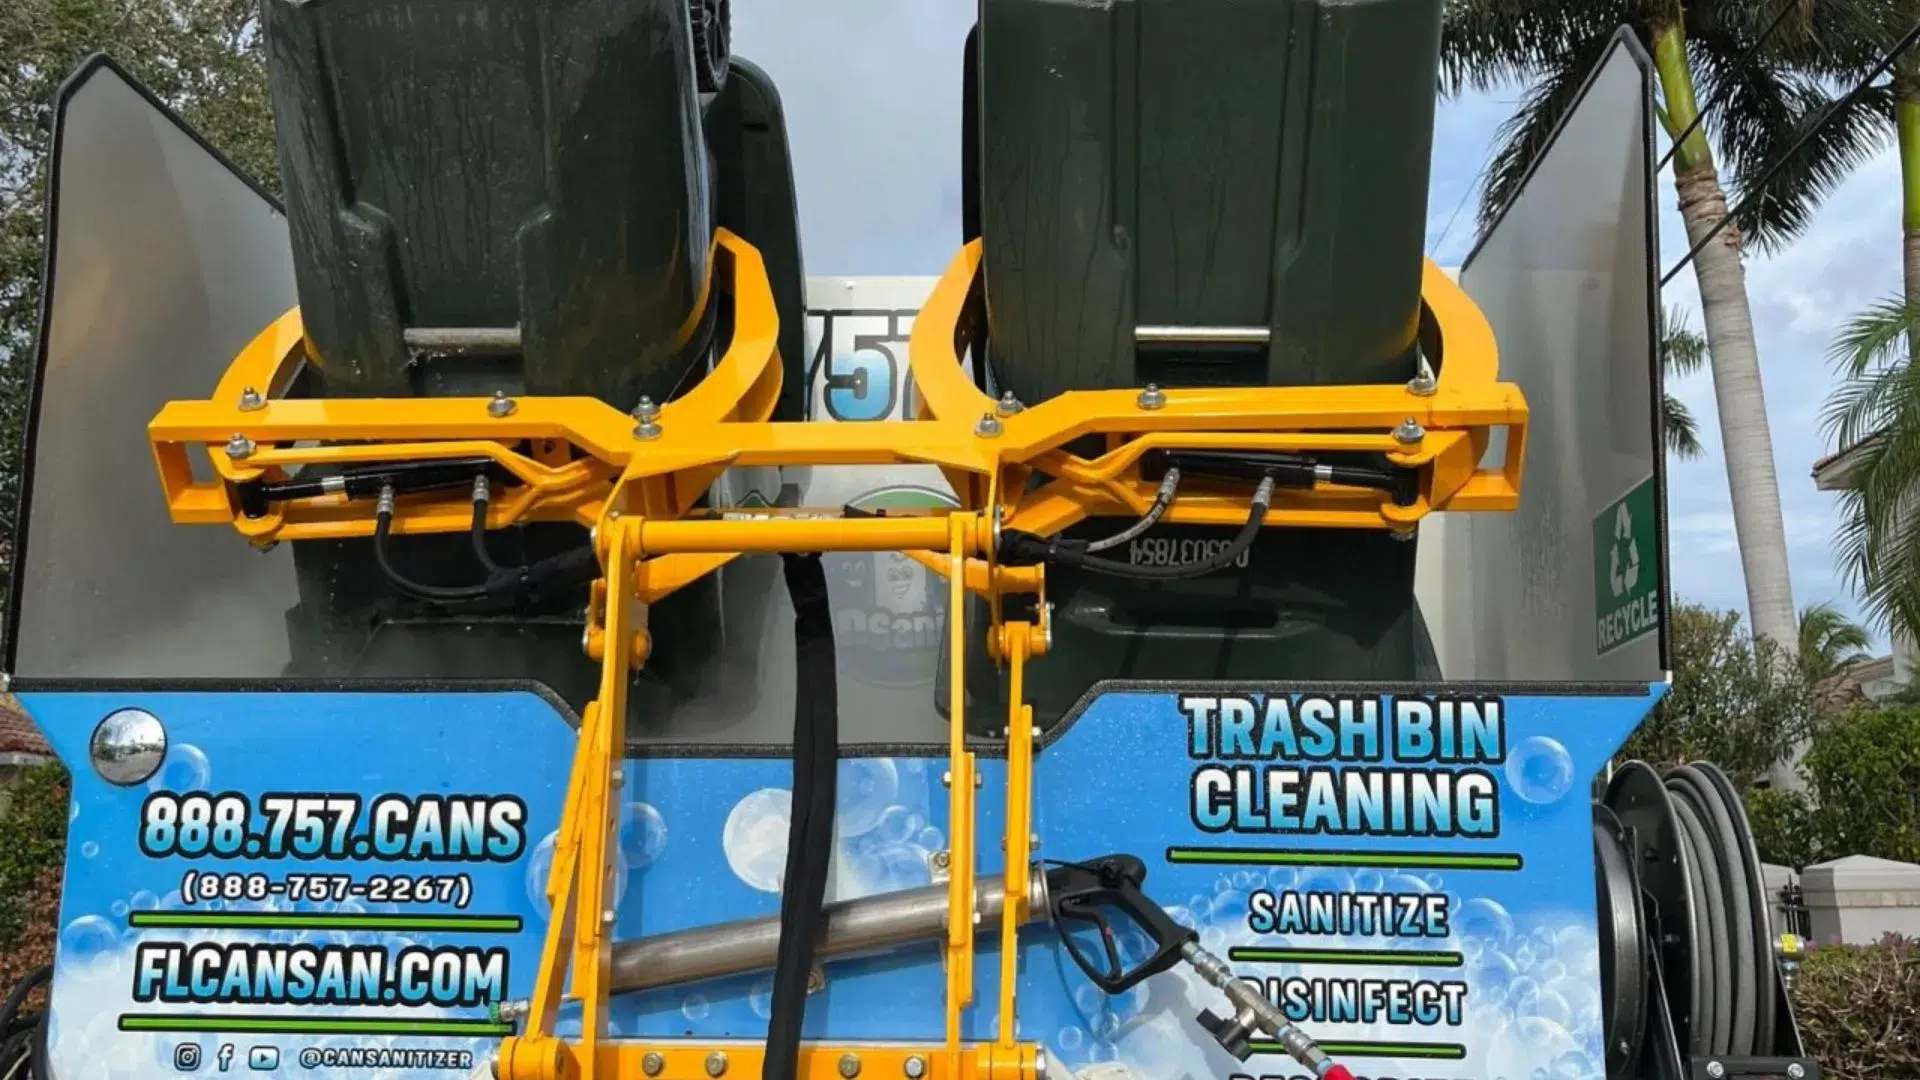 Automated trash bin cleaning system in action, lifting two garbage cans for sanitization.